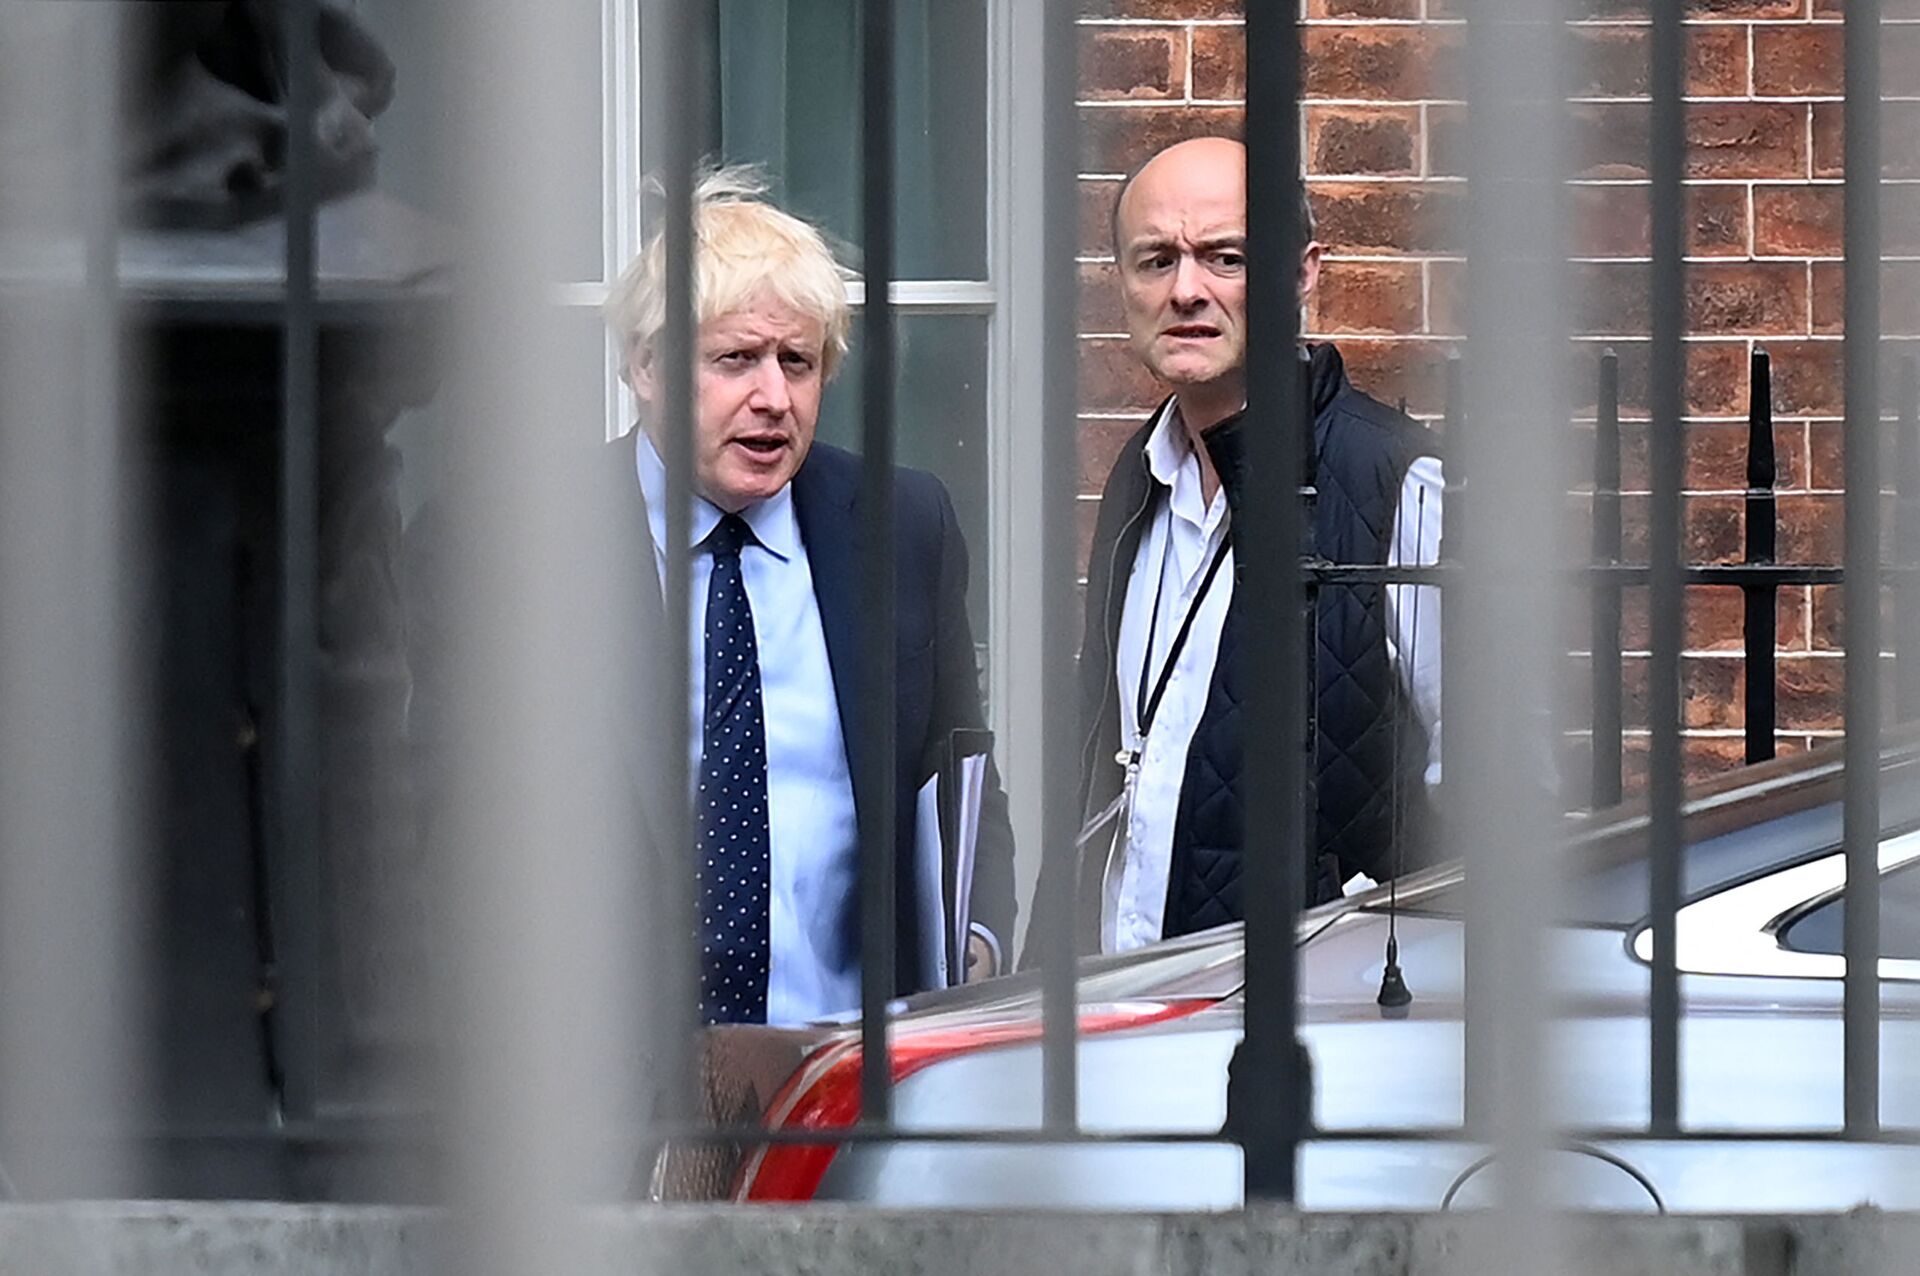 Britain's Prime Minister Boris Johnson (L) and his special advisor Dominic Cummings leave from the rear of Downing Street in central London on September 3, 2019, before heading to the Houses of Parliament - Sputnik International, 1920, 25.12.2021